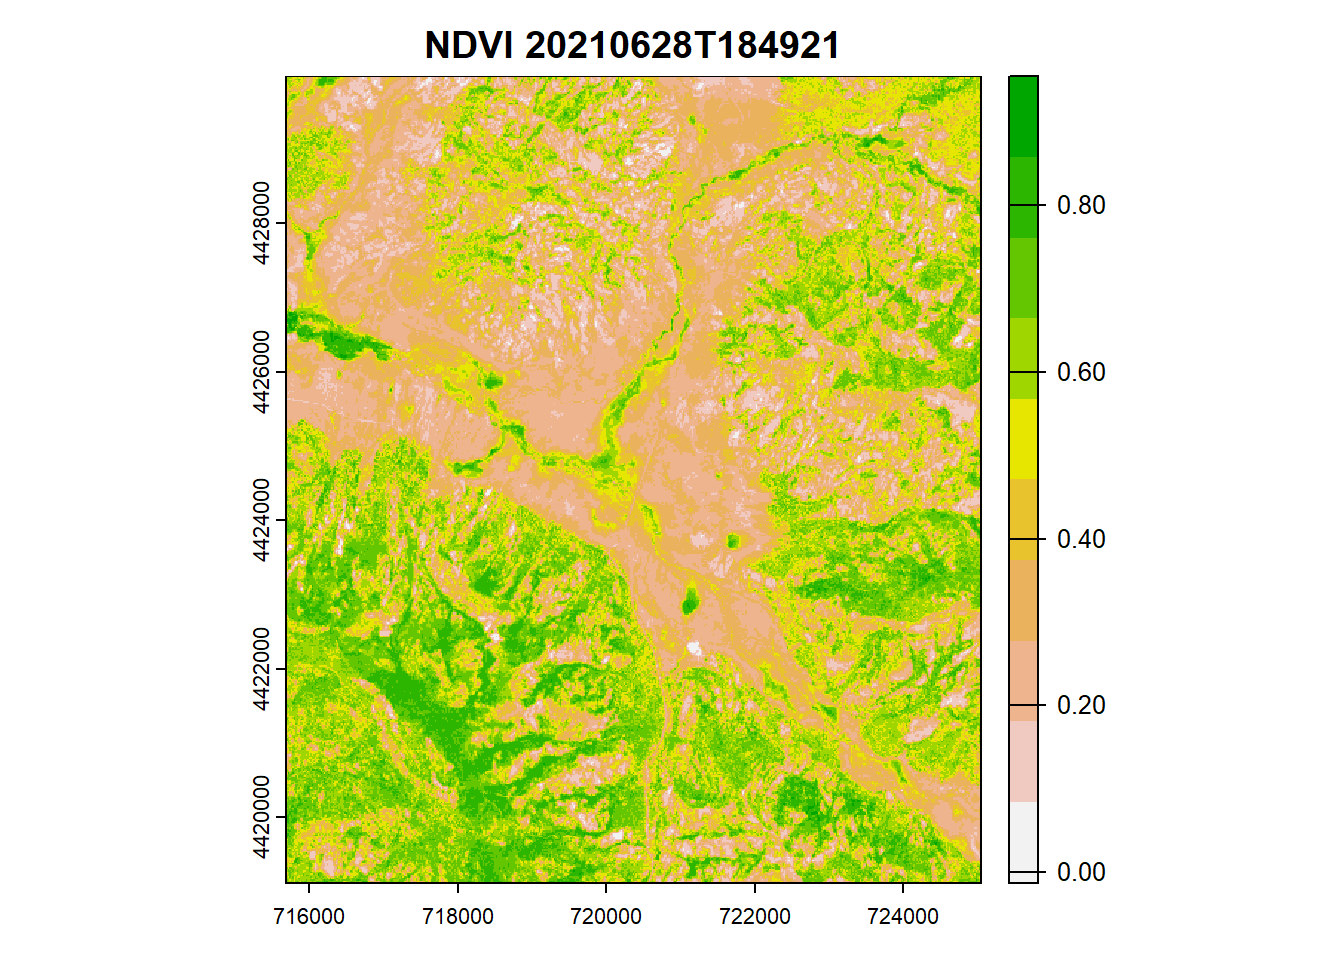 NDVI from Sentinel-2 image, 20210628.